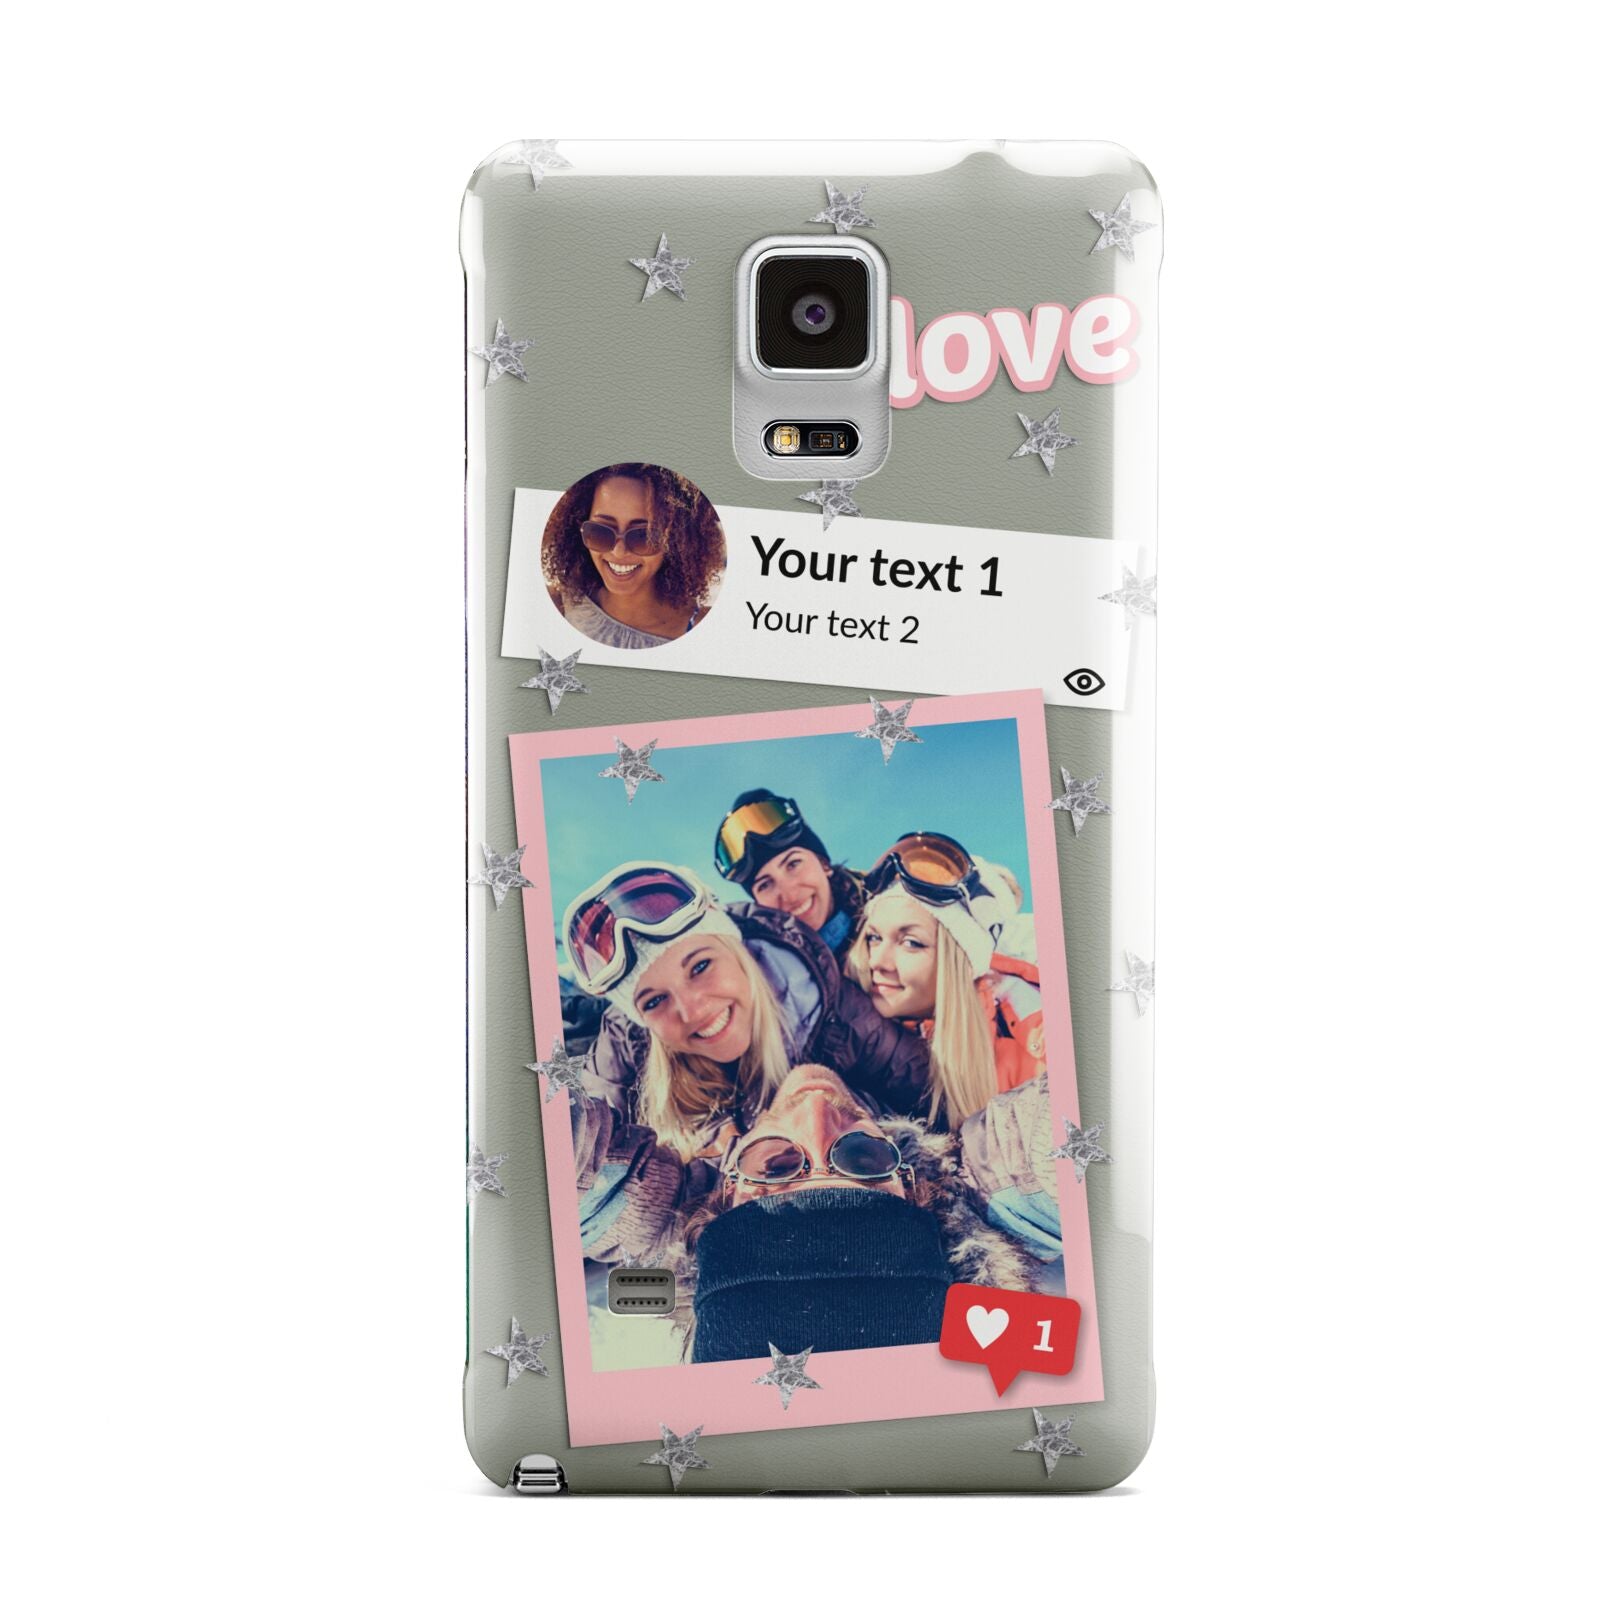 Starry Social Media Photo Montage Upload with Text Samsung Galaxy Note 4 Case